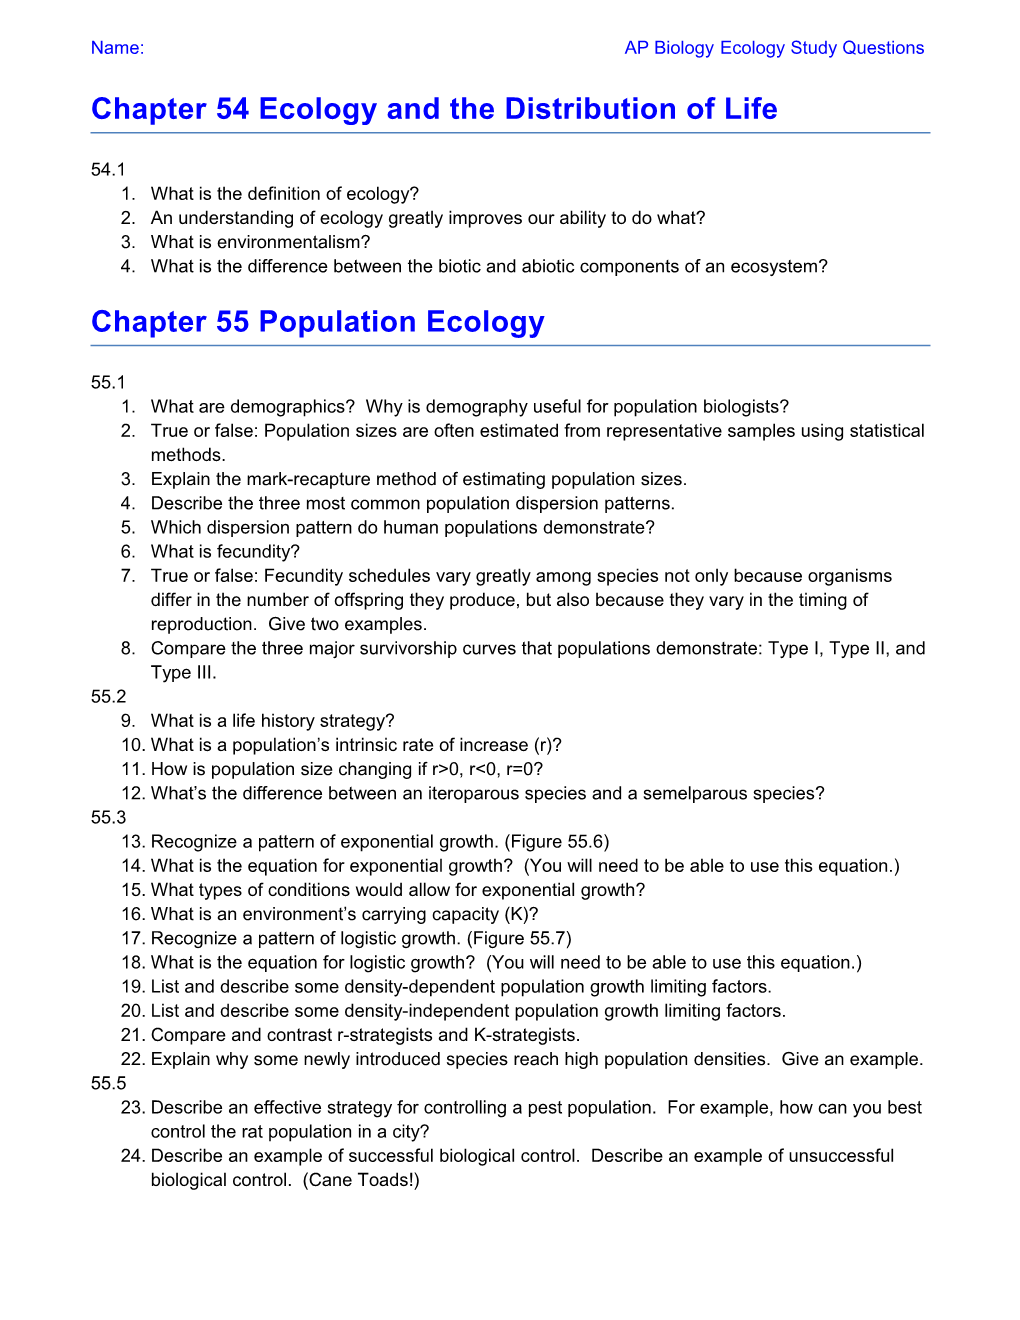 Name: AP Biology Ecology Study Questions